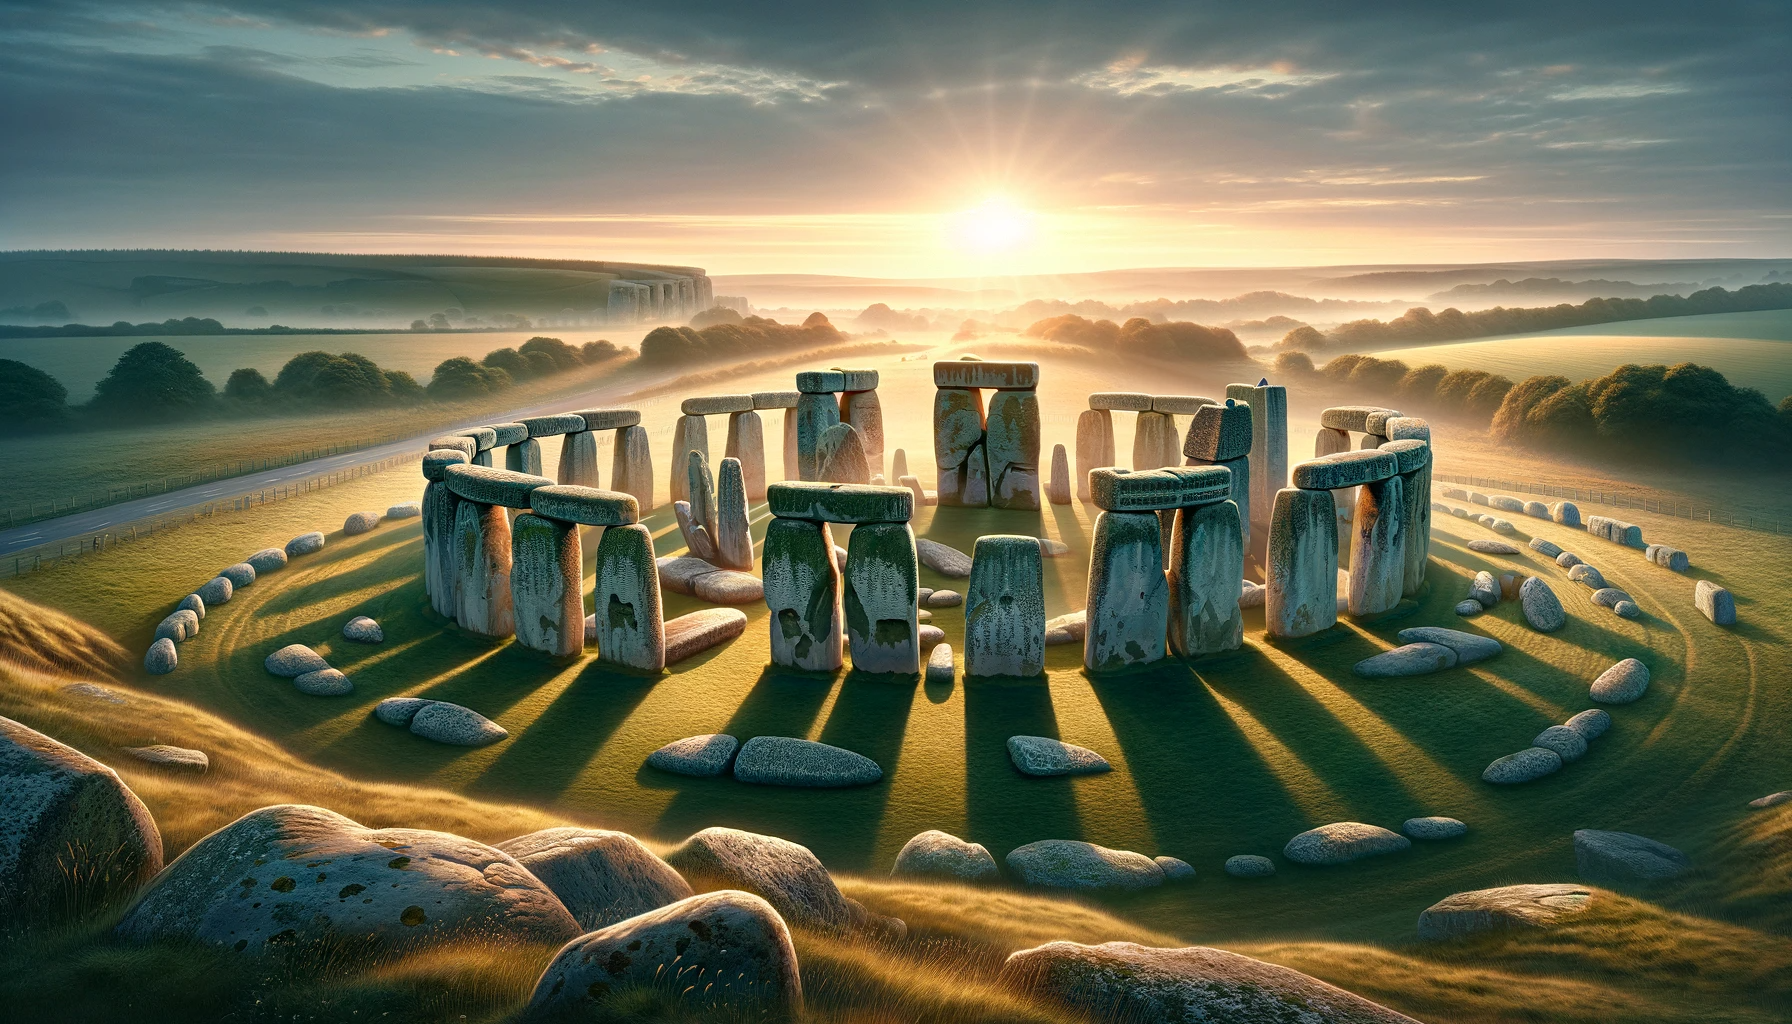 Stonehenge was part of a superstructure